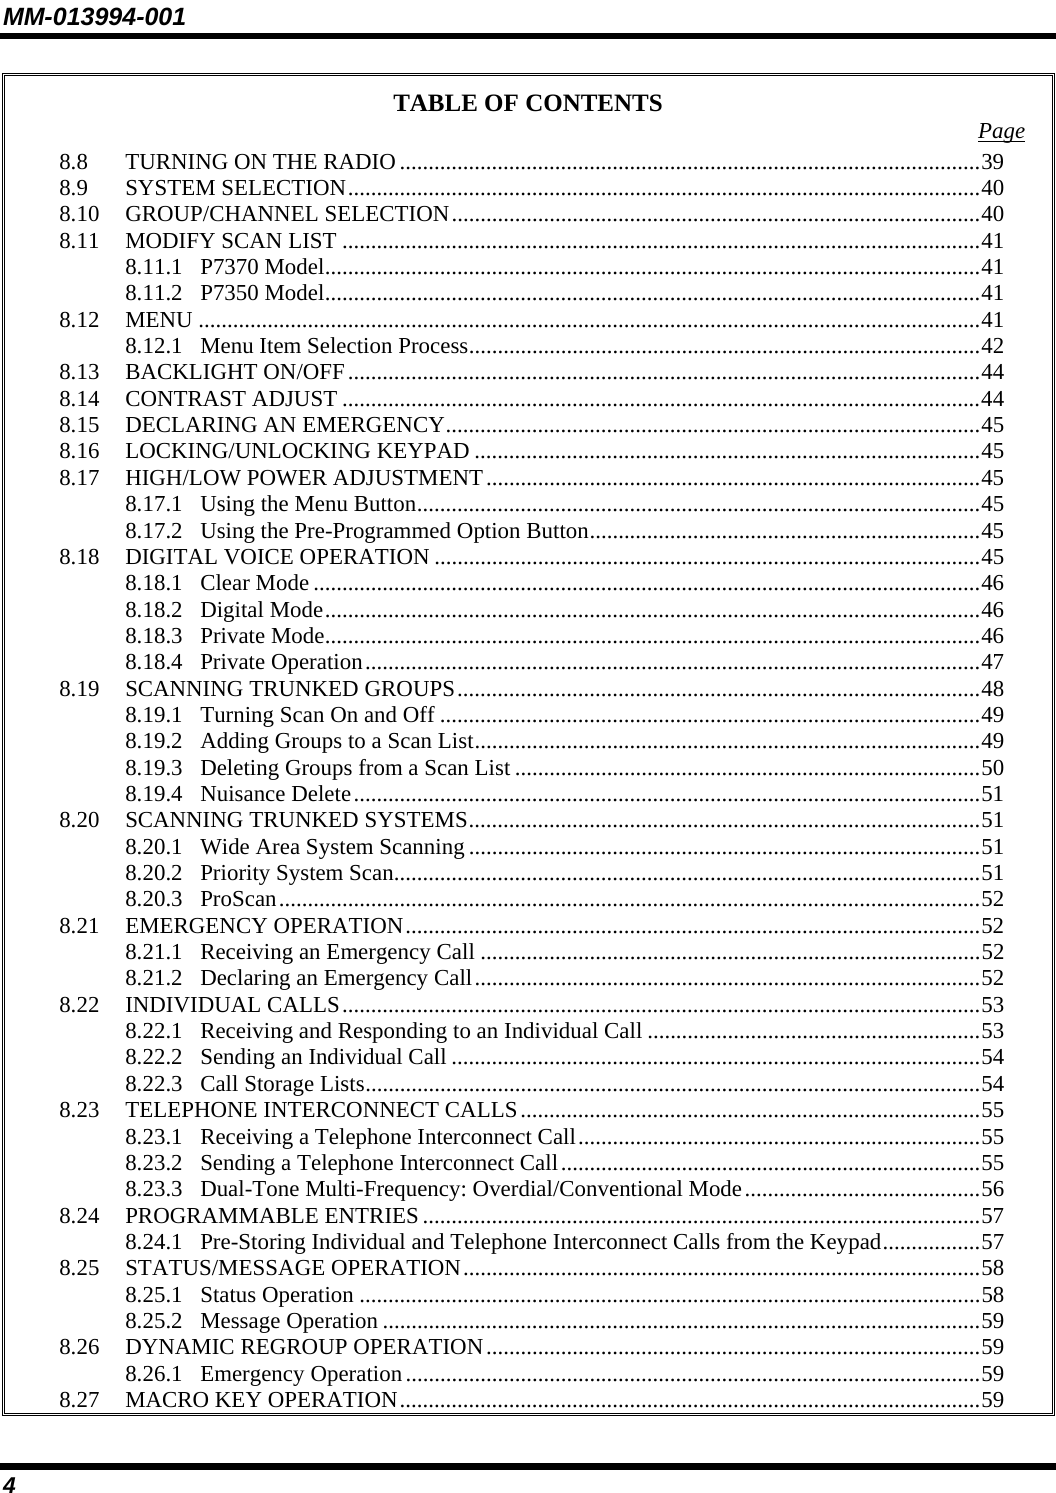 MM-013994-001 4 TABLE OF CONTENTS  Page 8.8 TURNING ON THE RADIO .....................................................................................................39 8.9 SYSTEM SELECTION..............................................................................................................40 8.10 GROUP/CHANNEL SELECTION............................................................................................40 8.11 MODIFY SCAN LIST ...............................................................................................................41 8.11.1 P7370 Model..................................................................................................................41 8.11.2 P7350 Model..................................................................................................................41 8.12 MENU ........................................................................................................................................41 8.12.1 Menu Item Selection Process.........................................................................................42 8.13 BACKLIGHT ON/OFF..............................................................................................................44 8.14 CONTRAST ADJUST ...............................................................................................................44 8.15 DECLARING AN EMERGENCY.............................................................................................45 8.16 LOCKING/UNLOCKING KEYPAD ........................................................................................45 8.17 HIGH/LOW POWER ADJUSTMENT......................................................................................45 8.17.1 Using the Menu Button..................................................................................................45 8.17.2 Using the Pre-Programmed Option Button....................................................................45 8.18 DIGITAL VOICE OPERATION ...............................................................................................45 8.18.1 Clear Mode ....................................................................................................................46 8.18.2 Digital Mode..................................................................................................................46 8.18.3 Private Mode..................................................................................................................46 8.18.4 Private Operation...........................................................................................................47 8.19 SCANNING TRUNKED GROUPS...........................................................................................48 8.19.1 Turning Scan On and Off ..............................................................................................49 8.19.2 Adding Groups to a Scan List........................................................................................49 8.19.3 Deleting Groups from a Scan List .................................................................................50 8.19.4 Nuisance Delete.............................................................................................................51 8.20 SCANNING TRUNKED SYSTEMS.........................................................................................51 8.20.1 Wide Area System Scanning .........................................................................................51 8.20.2 Priority System Scan......................................................................................................51 8.20.3 ProScan..........................................................................................................................52 8.21 EMERGENCY OPERATION....................................................................................................52 8.21.1 Receiving an Emergency Call .......................................................................................52 8.21.2 Declaring an Emergency Call........................................................................................52 8.22 INDIVIDUAL CALLS...............................................................................................................53 8.22.1 Receiving and Responding to an Individual Call ..........................................................53 8.22.2 Sending an Individual Call ............................................................................................54 8.22.3 Call Storage Lists...........................................................................................................54 8.23 TELEPHONE INTERCONNECT CALLS................................................................................55 8.23.1 Receiving a Telephone Interconnect Call......................................................................55 8.23.2 Sending a Telephone Interconnect Call.........................................................................55 8.23.3 Dual-Tone Multi-Frequency: Overdial/Conventional Mode.........................................56 8.24 PROGRAMMABLE ENTRIES .................................................................................................57 8.24.1 Pre-Storing Individual and Telephone Interconnect Calls from the Keypad.................57 8.25 STATUS/MESSAGE OPERATION..........................................................................................58 8.25.1 Status Operation ............................................................................................................58 8.25.2 Message Operation ........................................................................................................59 8.26 DYNAMIC REGROUP OPERATION......................................................................................59 8.26.1 Emergency Operation....................................................................................................59 8.27 MACRO KEY OPERATION.....................................................................................................59 